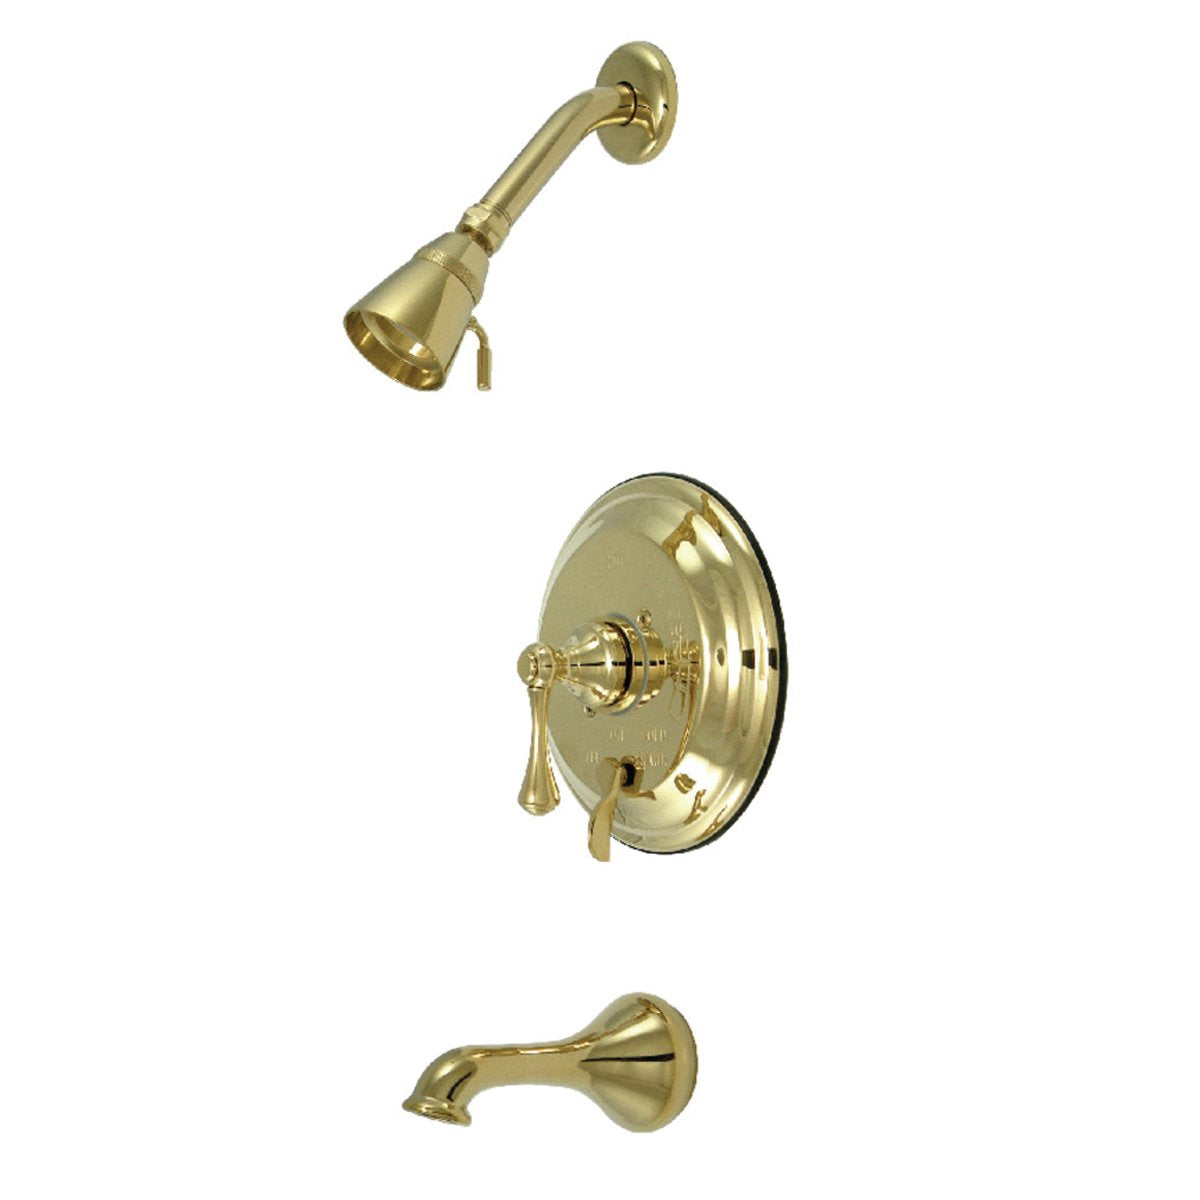 Kingston Brass Single Lever Handle Tub and Shower Faucet